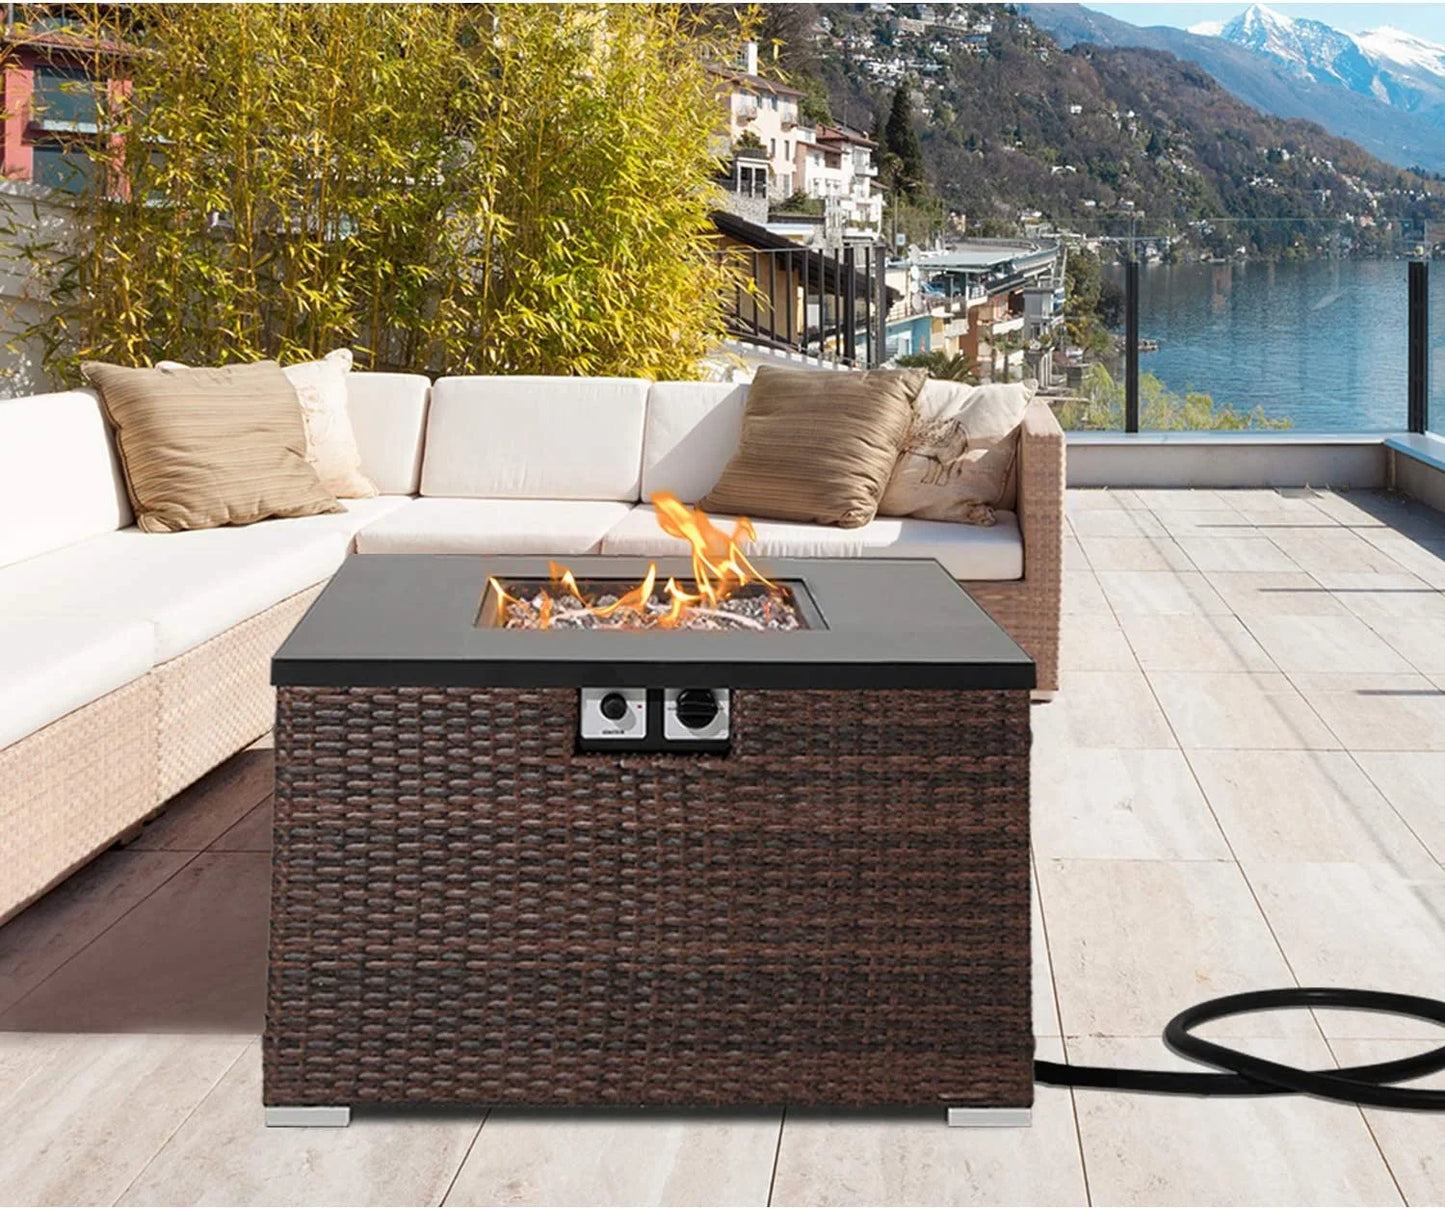 ZWNLKQG Propane Patio Fire Pit Table  Lava Rocks and Rain Cover for Outdoor Leisure Party 40 000 BTU  Tank Outside  32-inch Square Dark Brown Wicker Fire Table